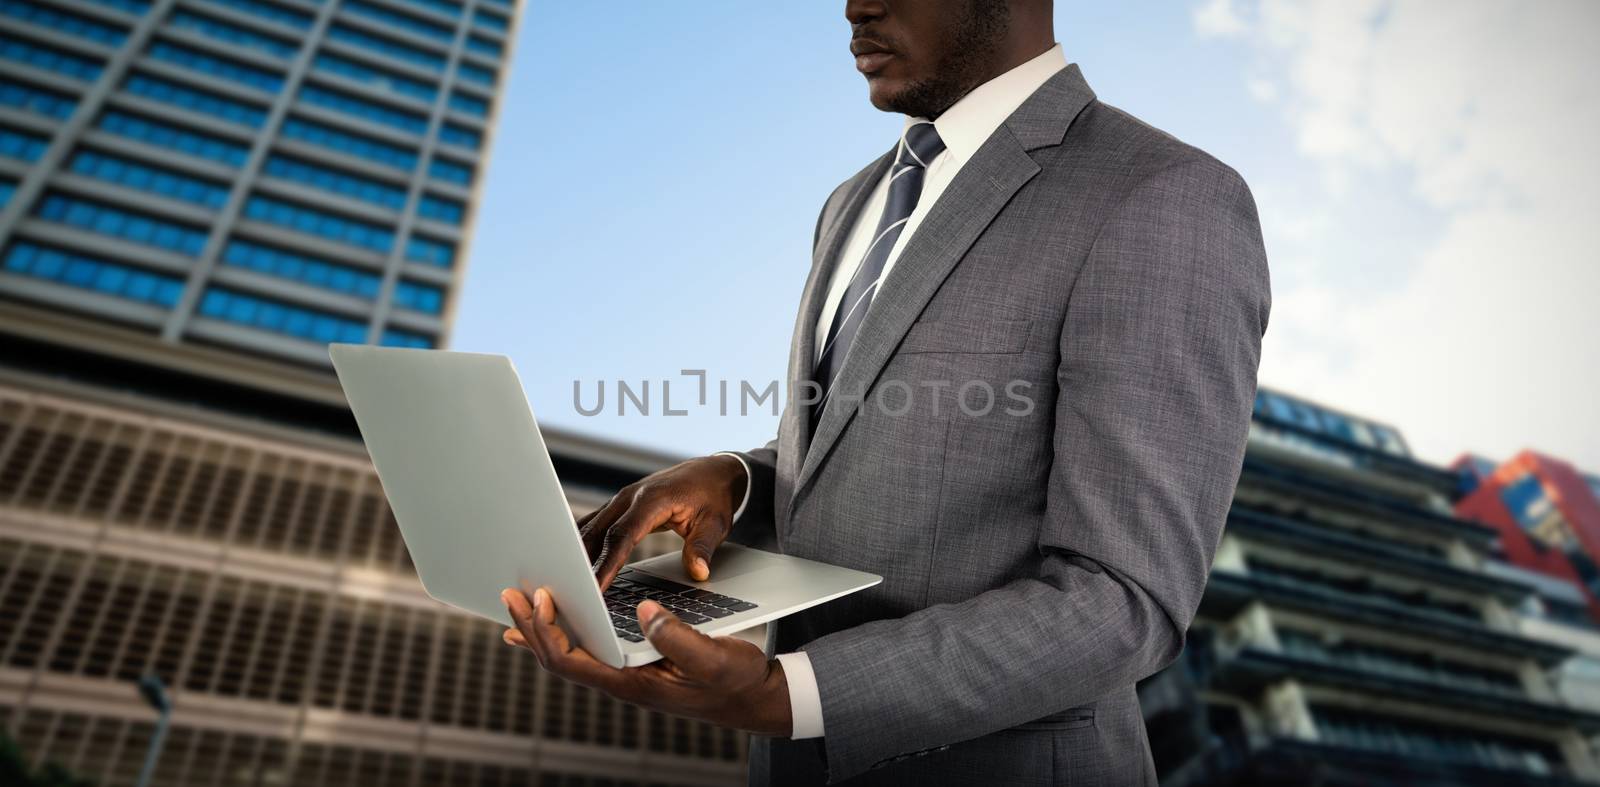 Midsection of businessman using laptop against building against cloudy sky